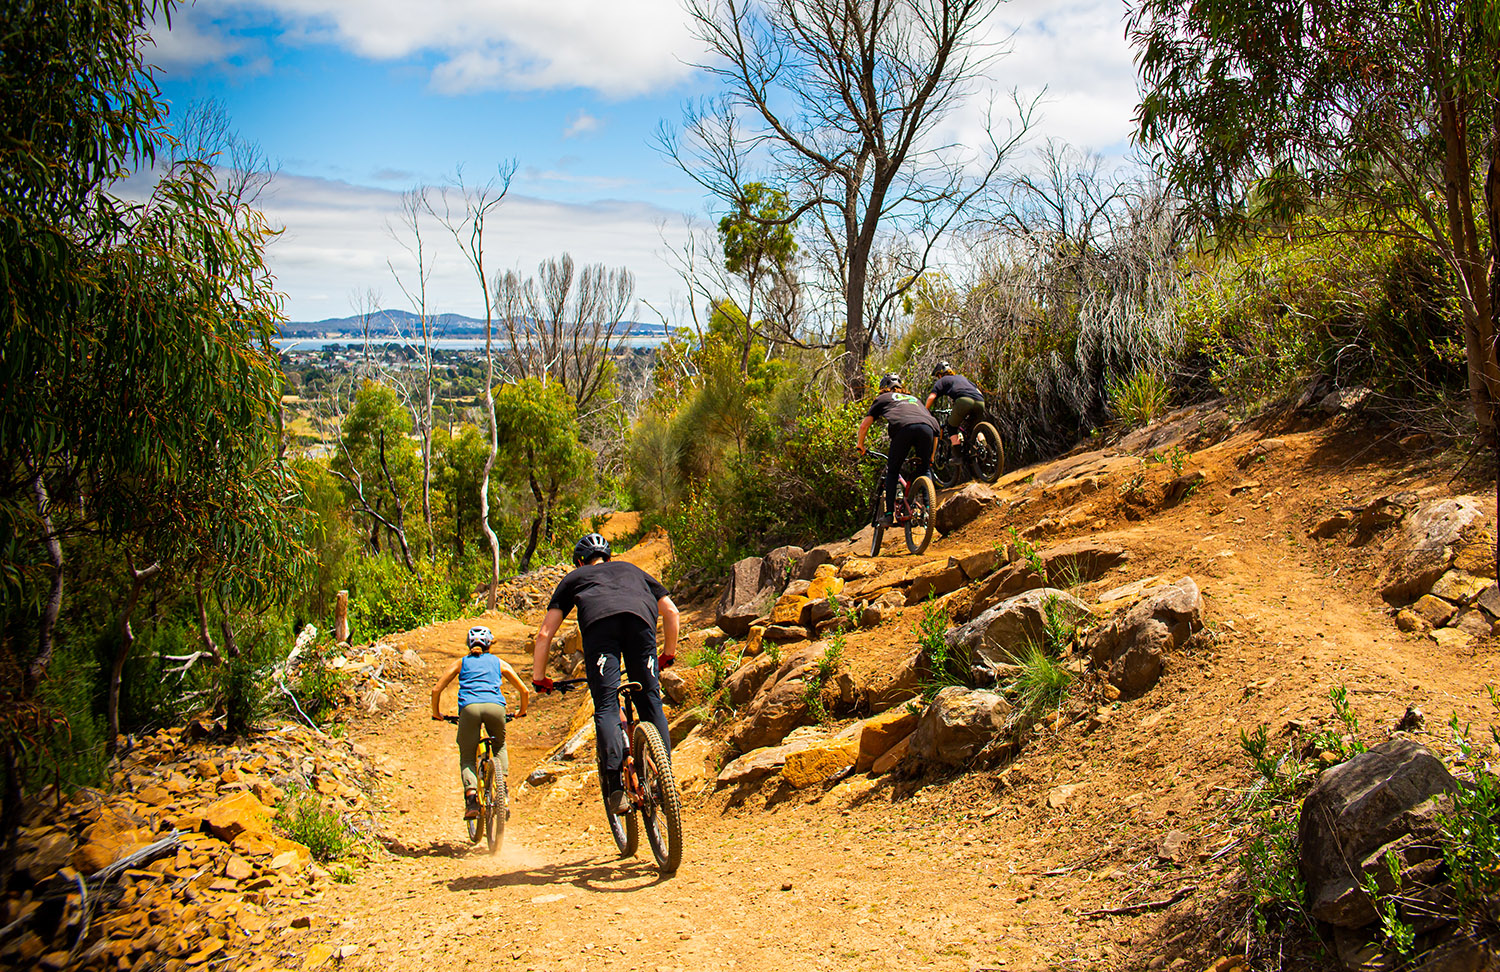 george town's mountain bike trails are some of the best in tasmania